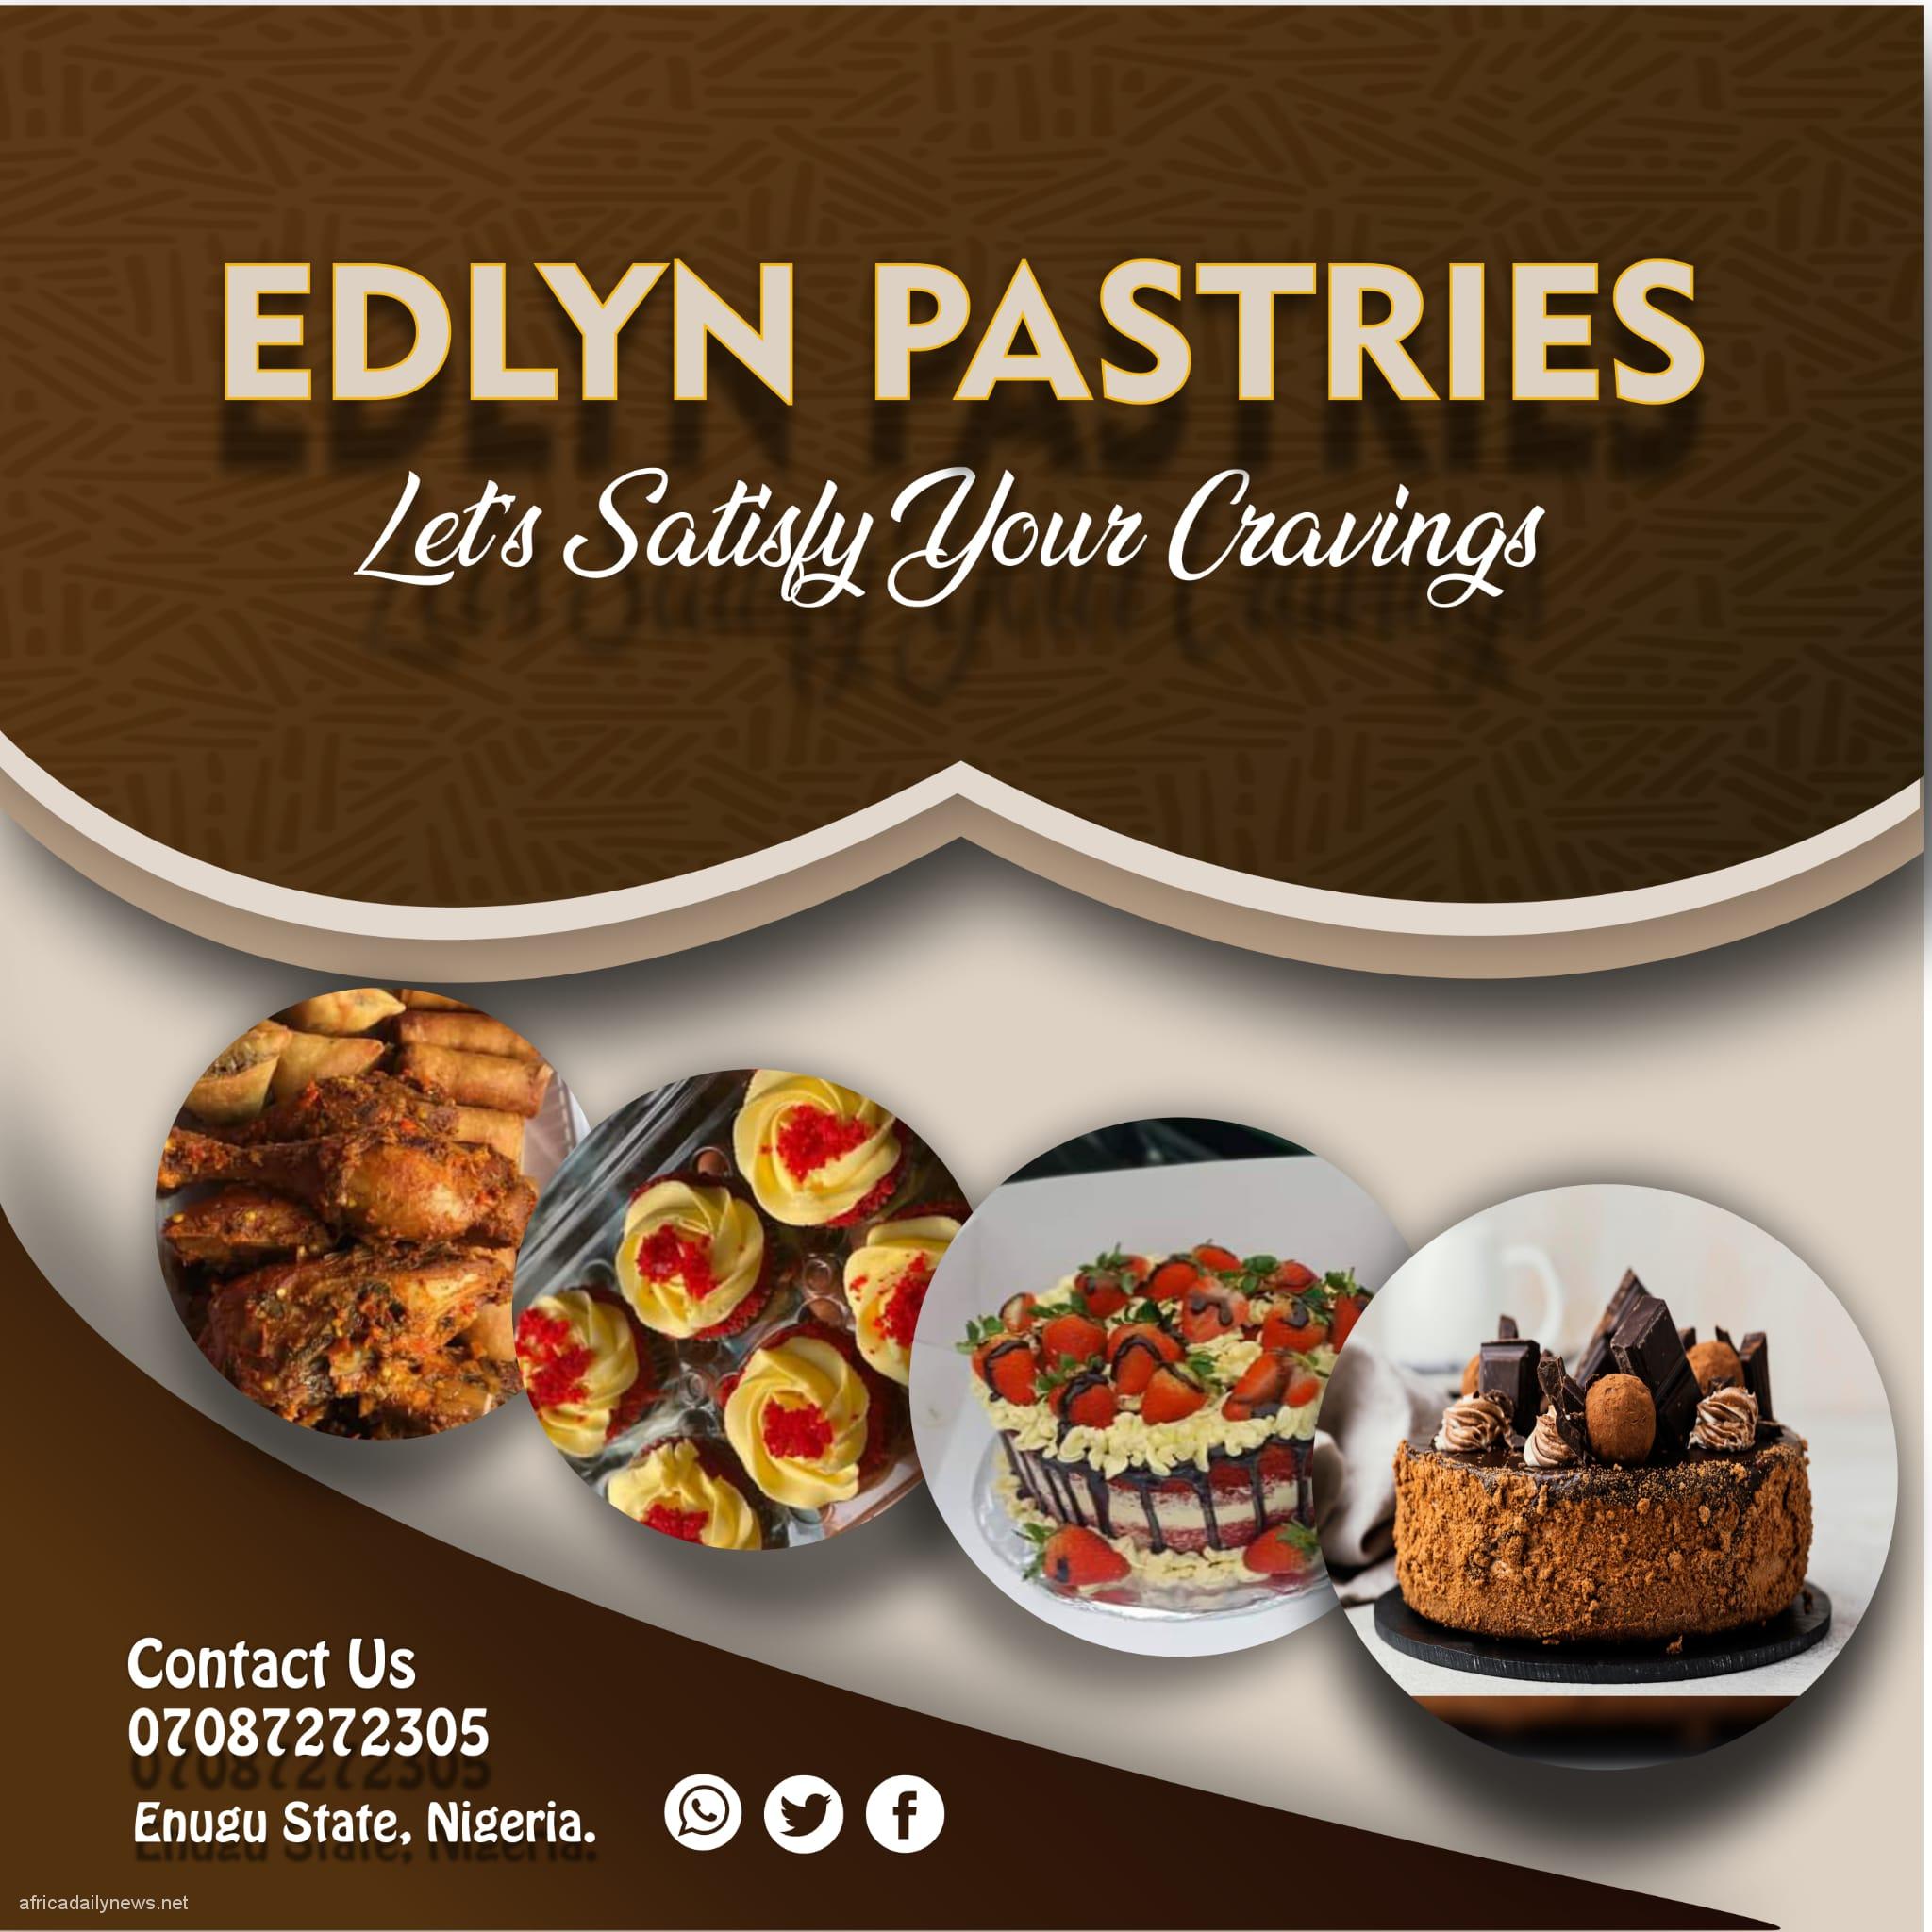 Edlyn Pastries Let's Satisfy Your Cravings